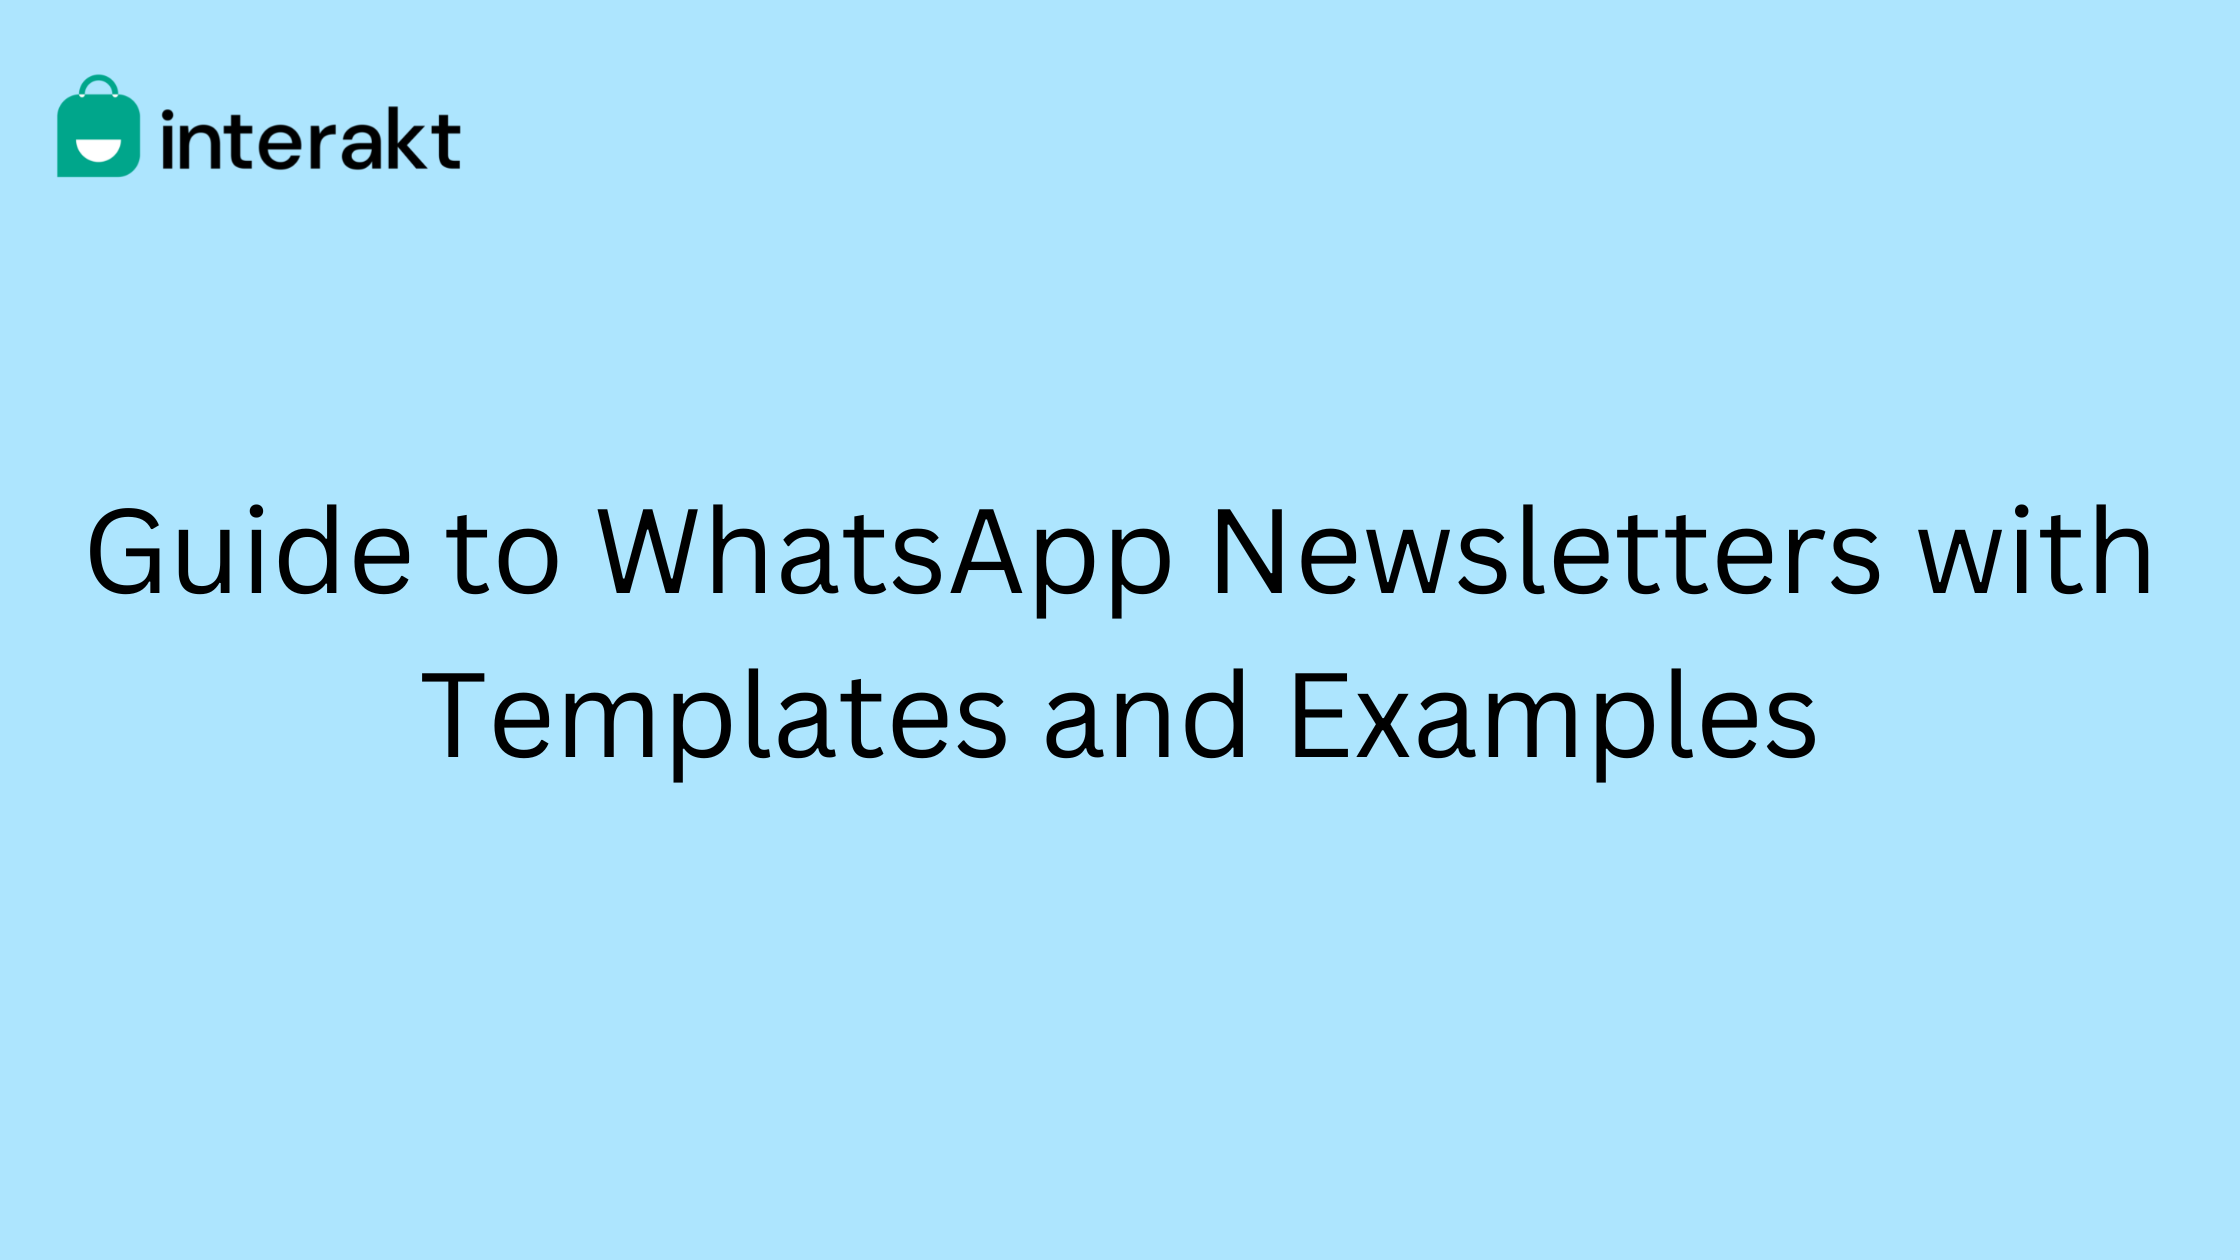 Guide to WhatsApp Newsletters with Templates and